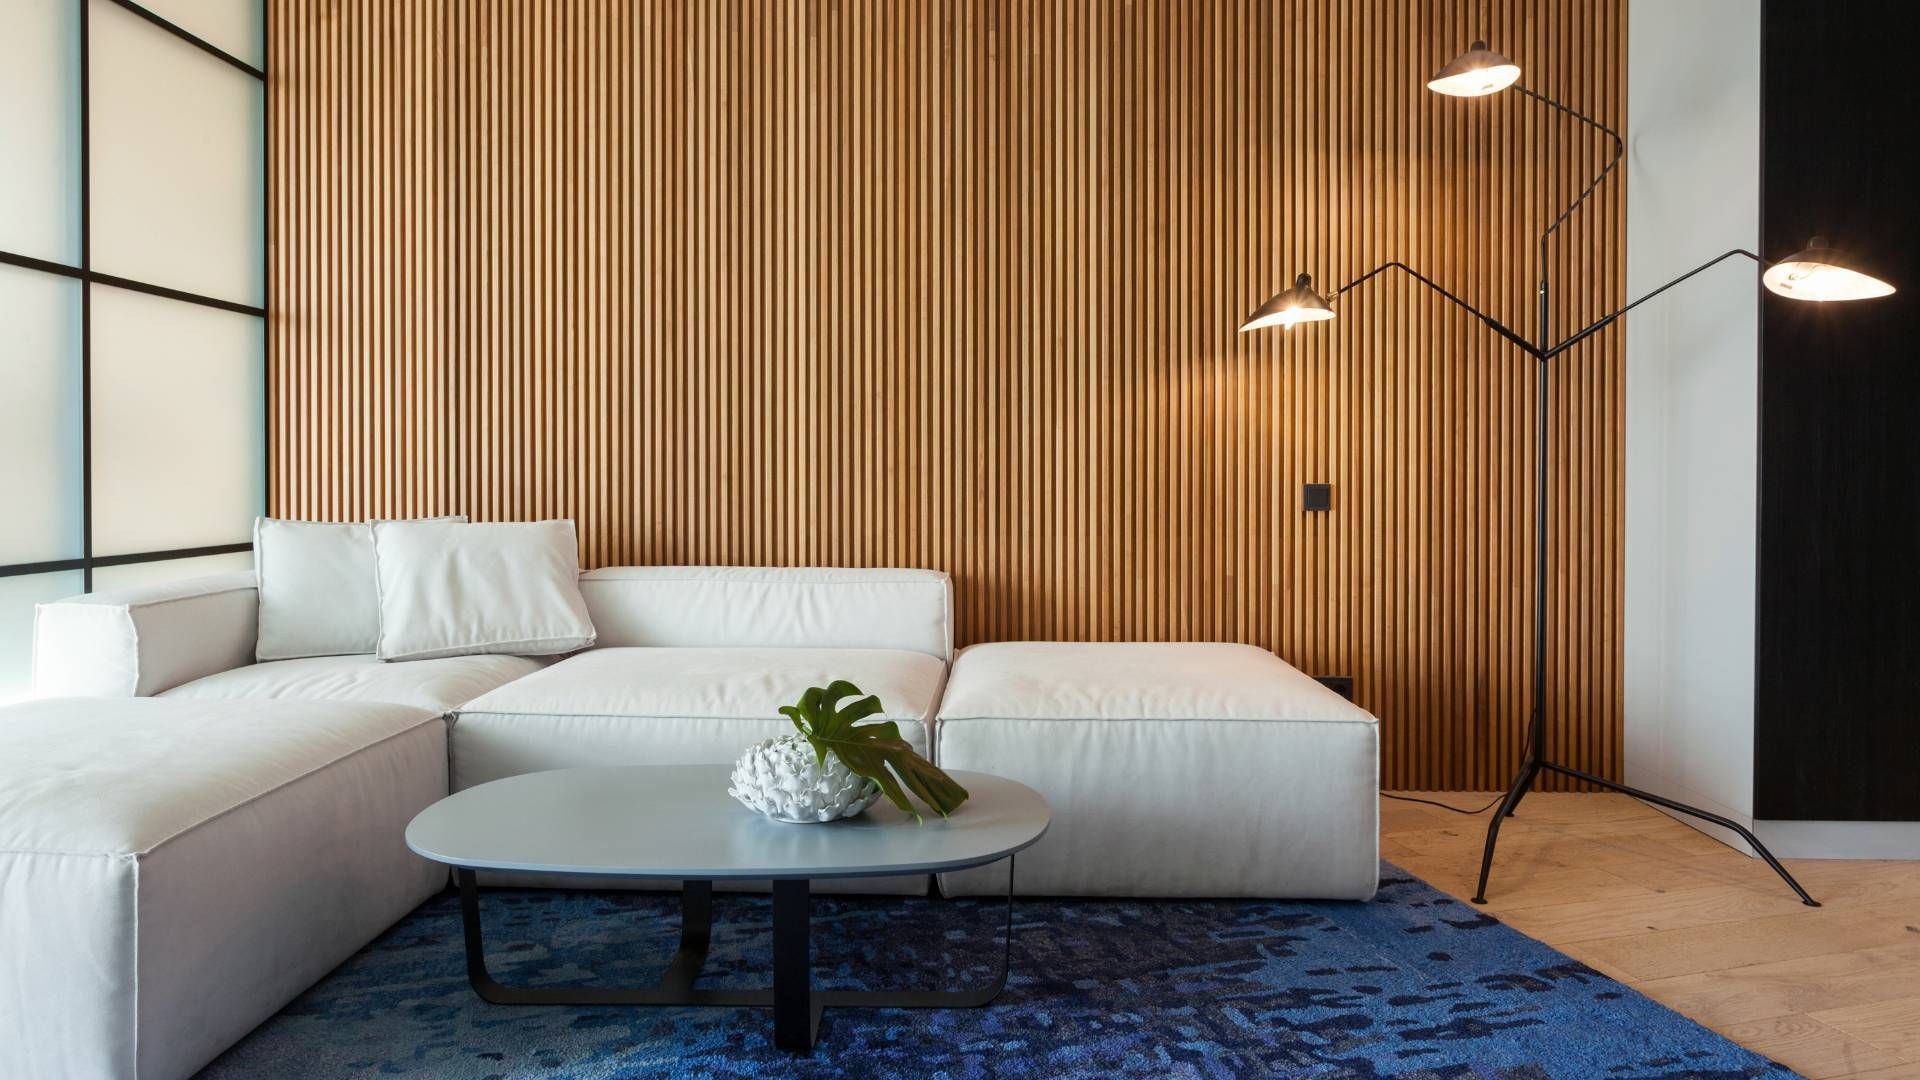 4 ways to use wood panelling in your property